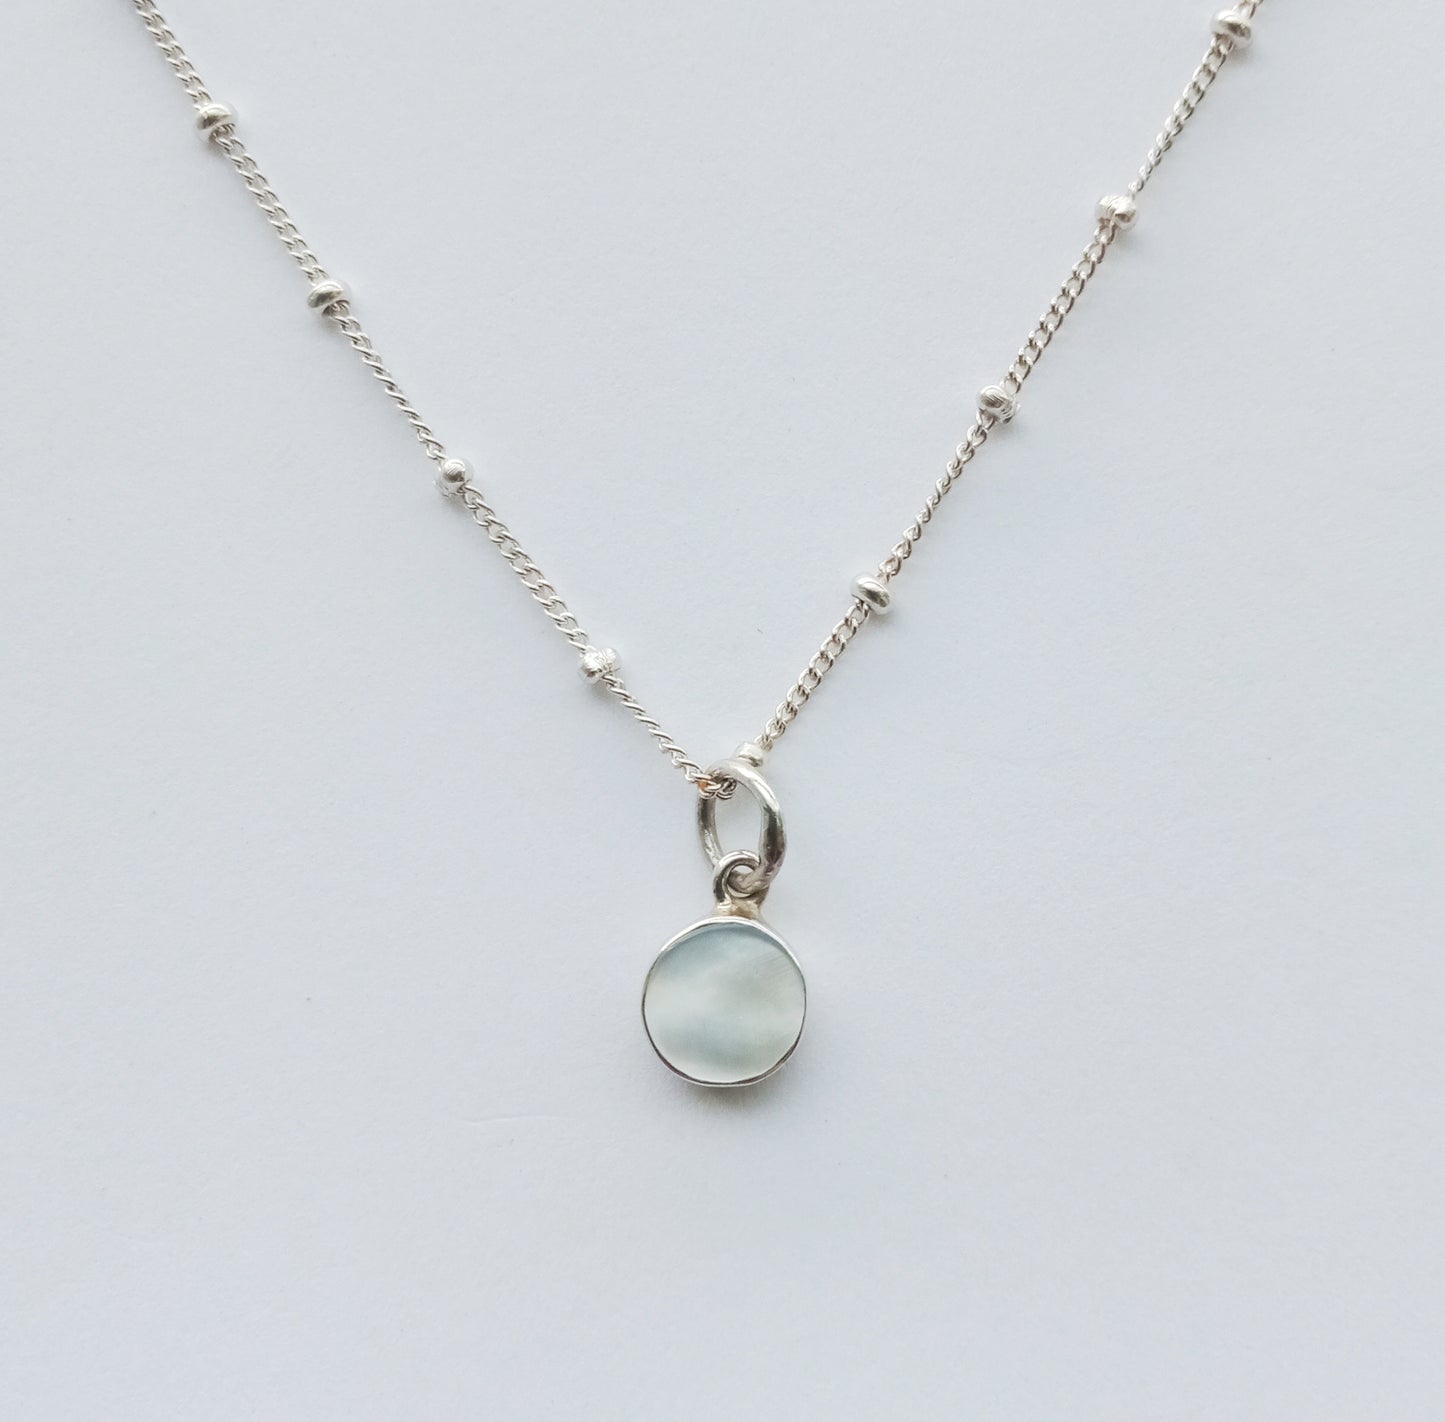 Bobble Chain Necklace with Mini Mother of Pearl Charm